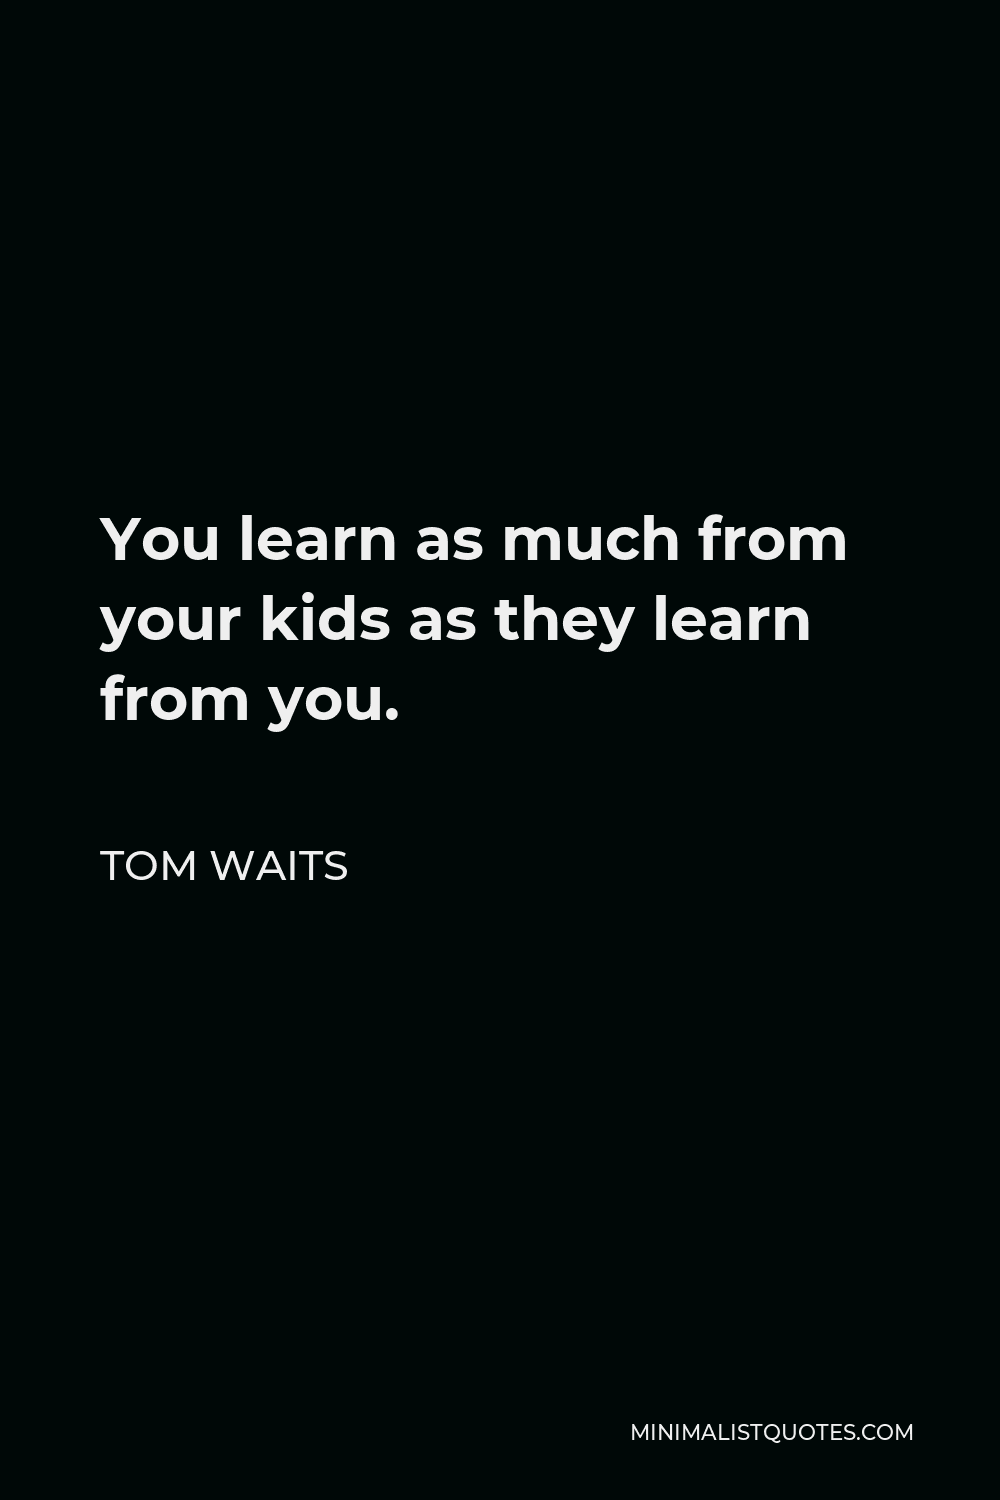 Tom Waits Quote - You learn as much from your kids as they learn from you.